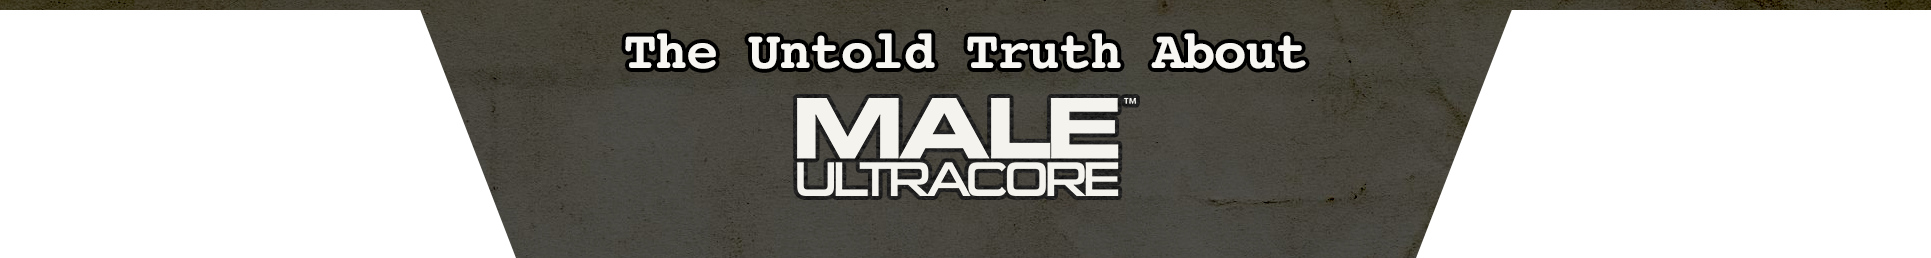 The Untold Truth About Male UltraCore, Does It Really Work